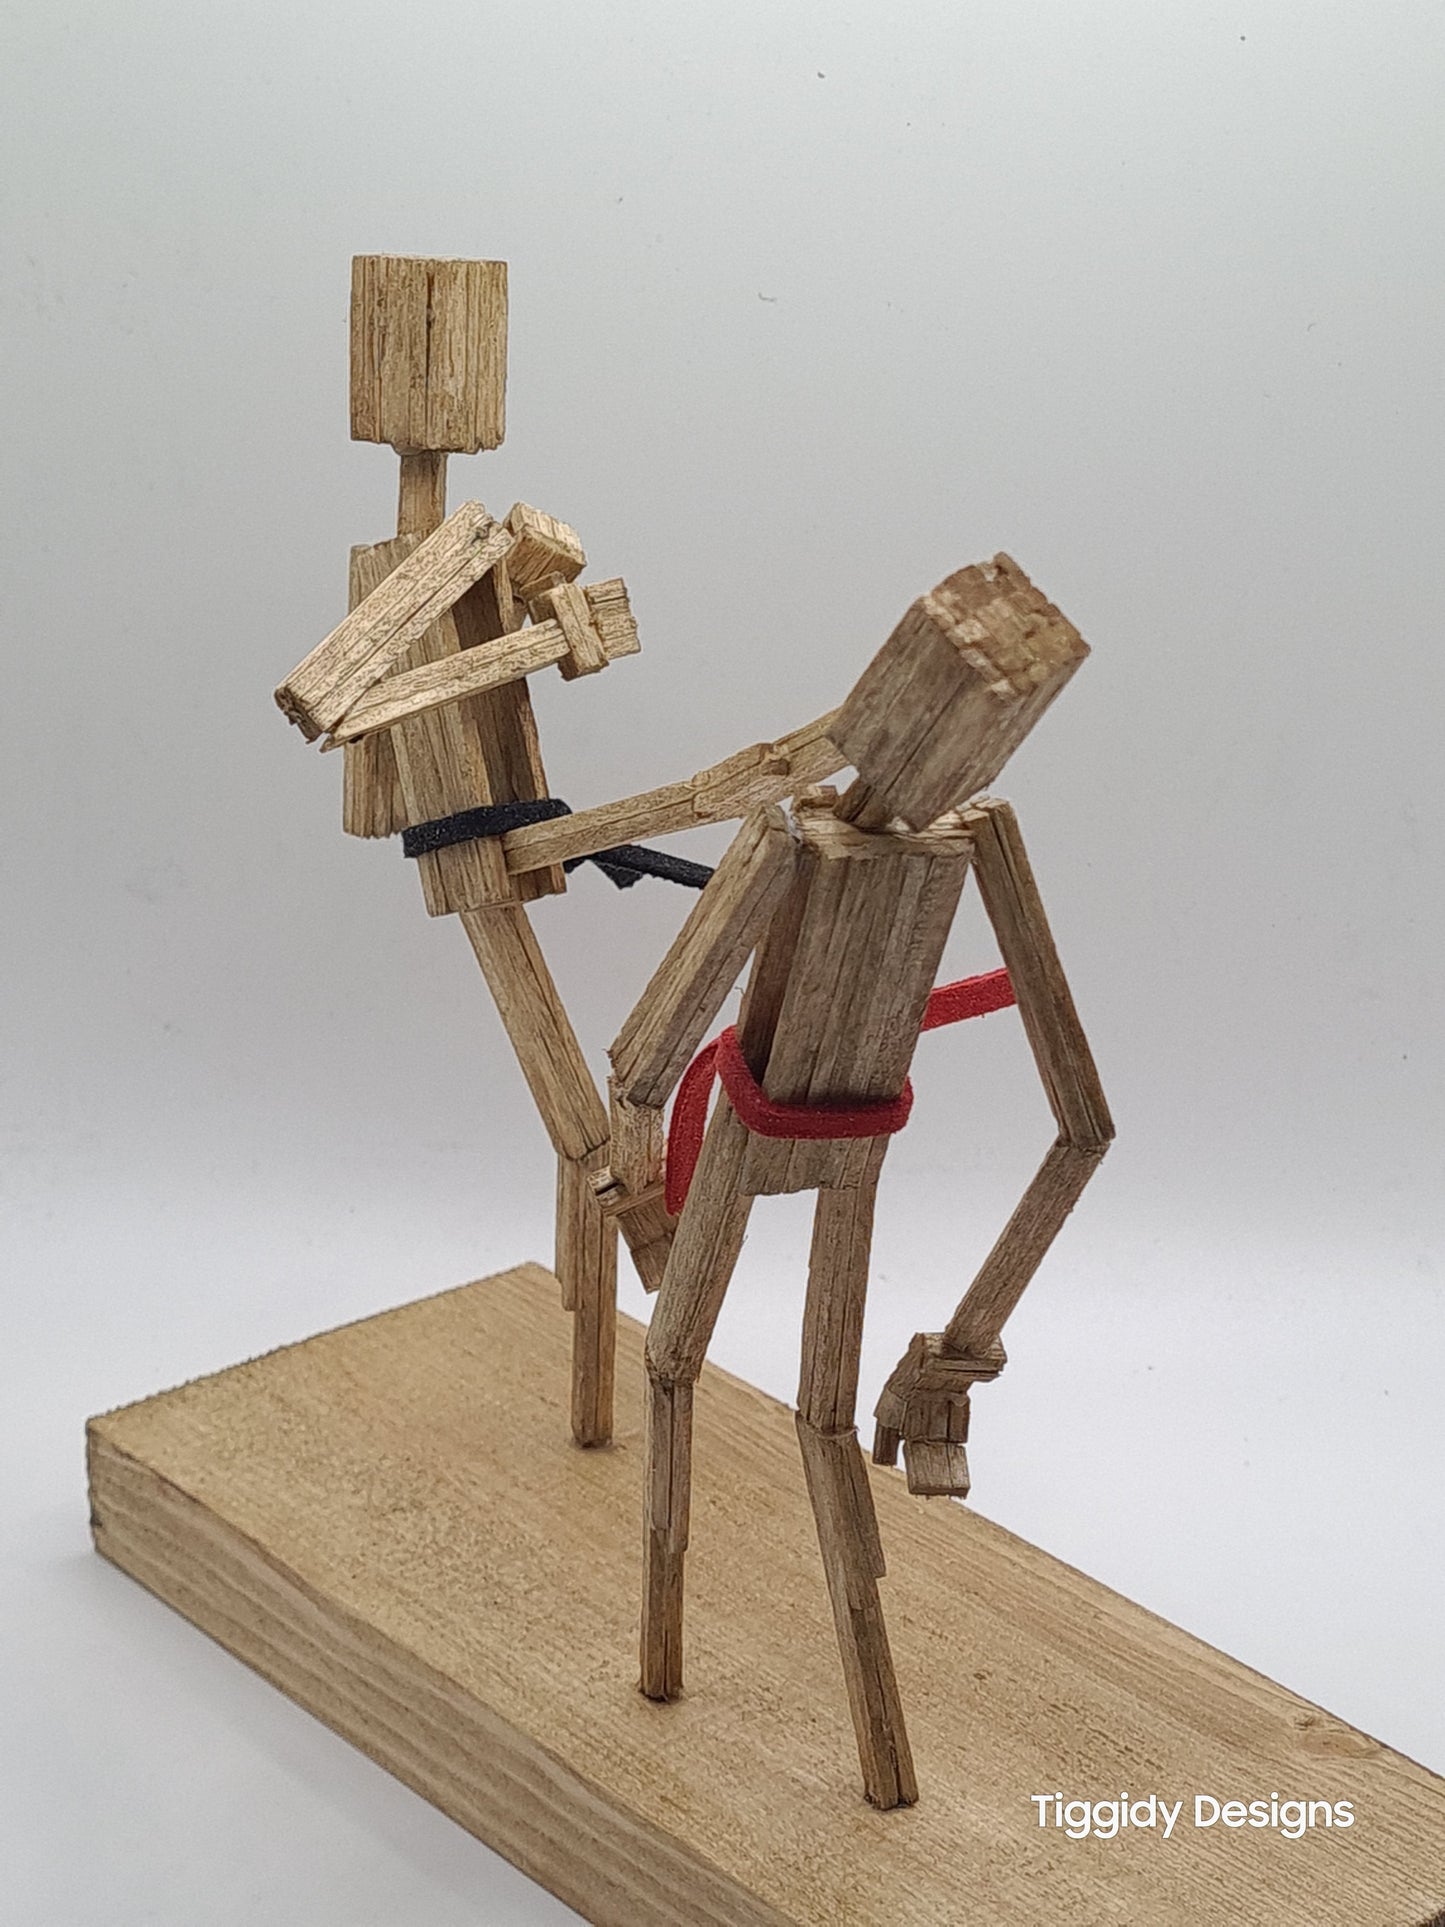 Kick To The Head - Handcrafted Wooden Matchstick Figures - Gifts, Ornaments and Decor By Tiggidy Designs